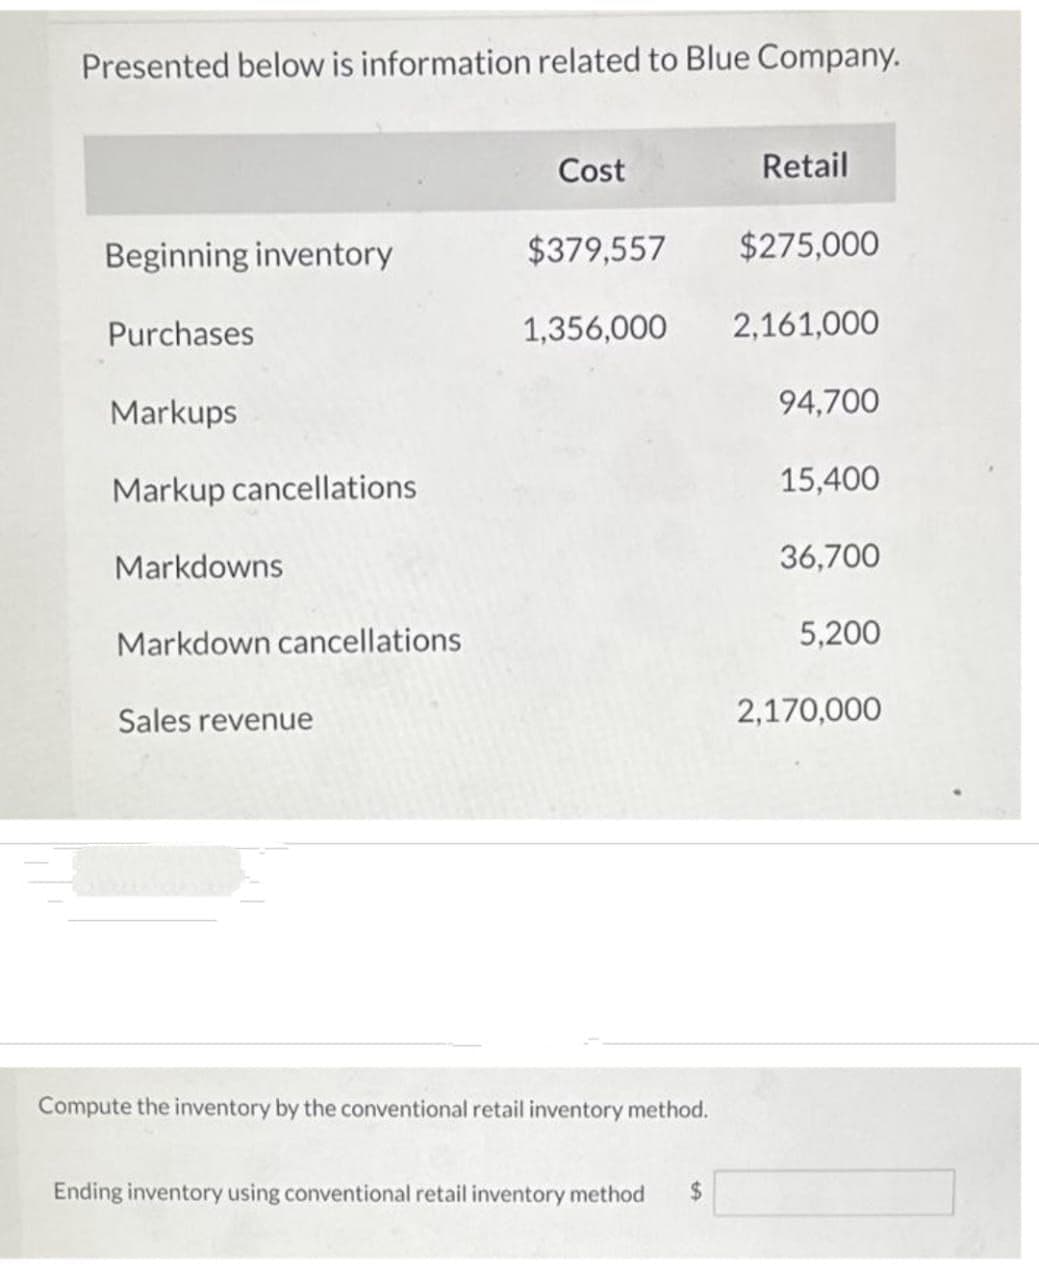 Presented below is information related to Blue Company.
Beginning inventory
Purchases
Markups
Markup cancellations
Markdowns
Markdown cancellations
Sales revenue
Retail
$379,557
$275,000
1,356,000 2,161,000
94,700
Cost
Compute the inventory by the conventional retail inventory method.
Ending inventory using conventional retail inventory method $
15,400
36,700
5,200
2,170,000